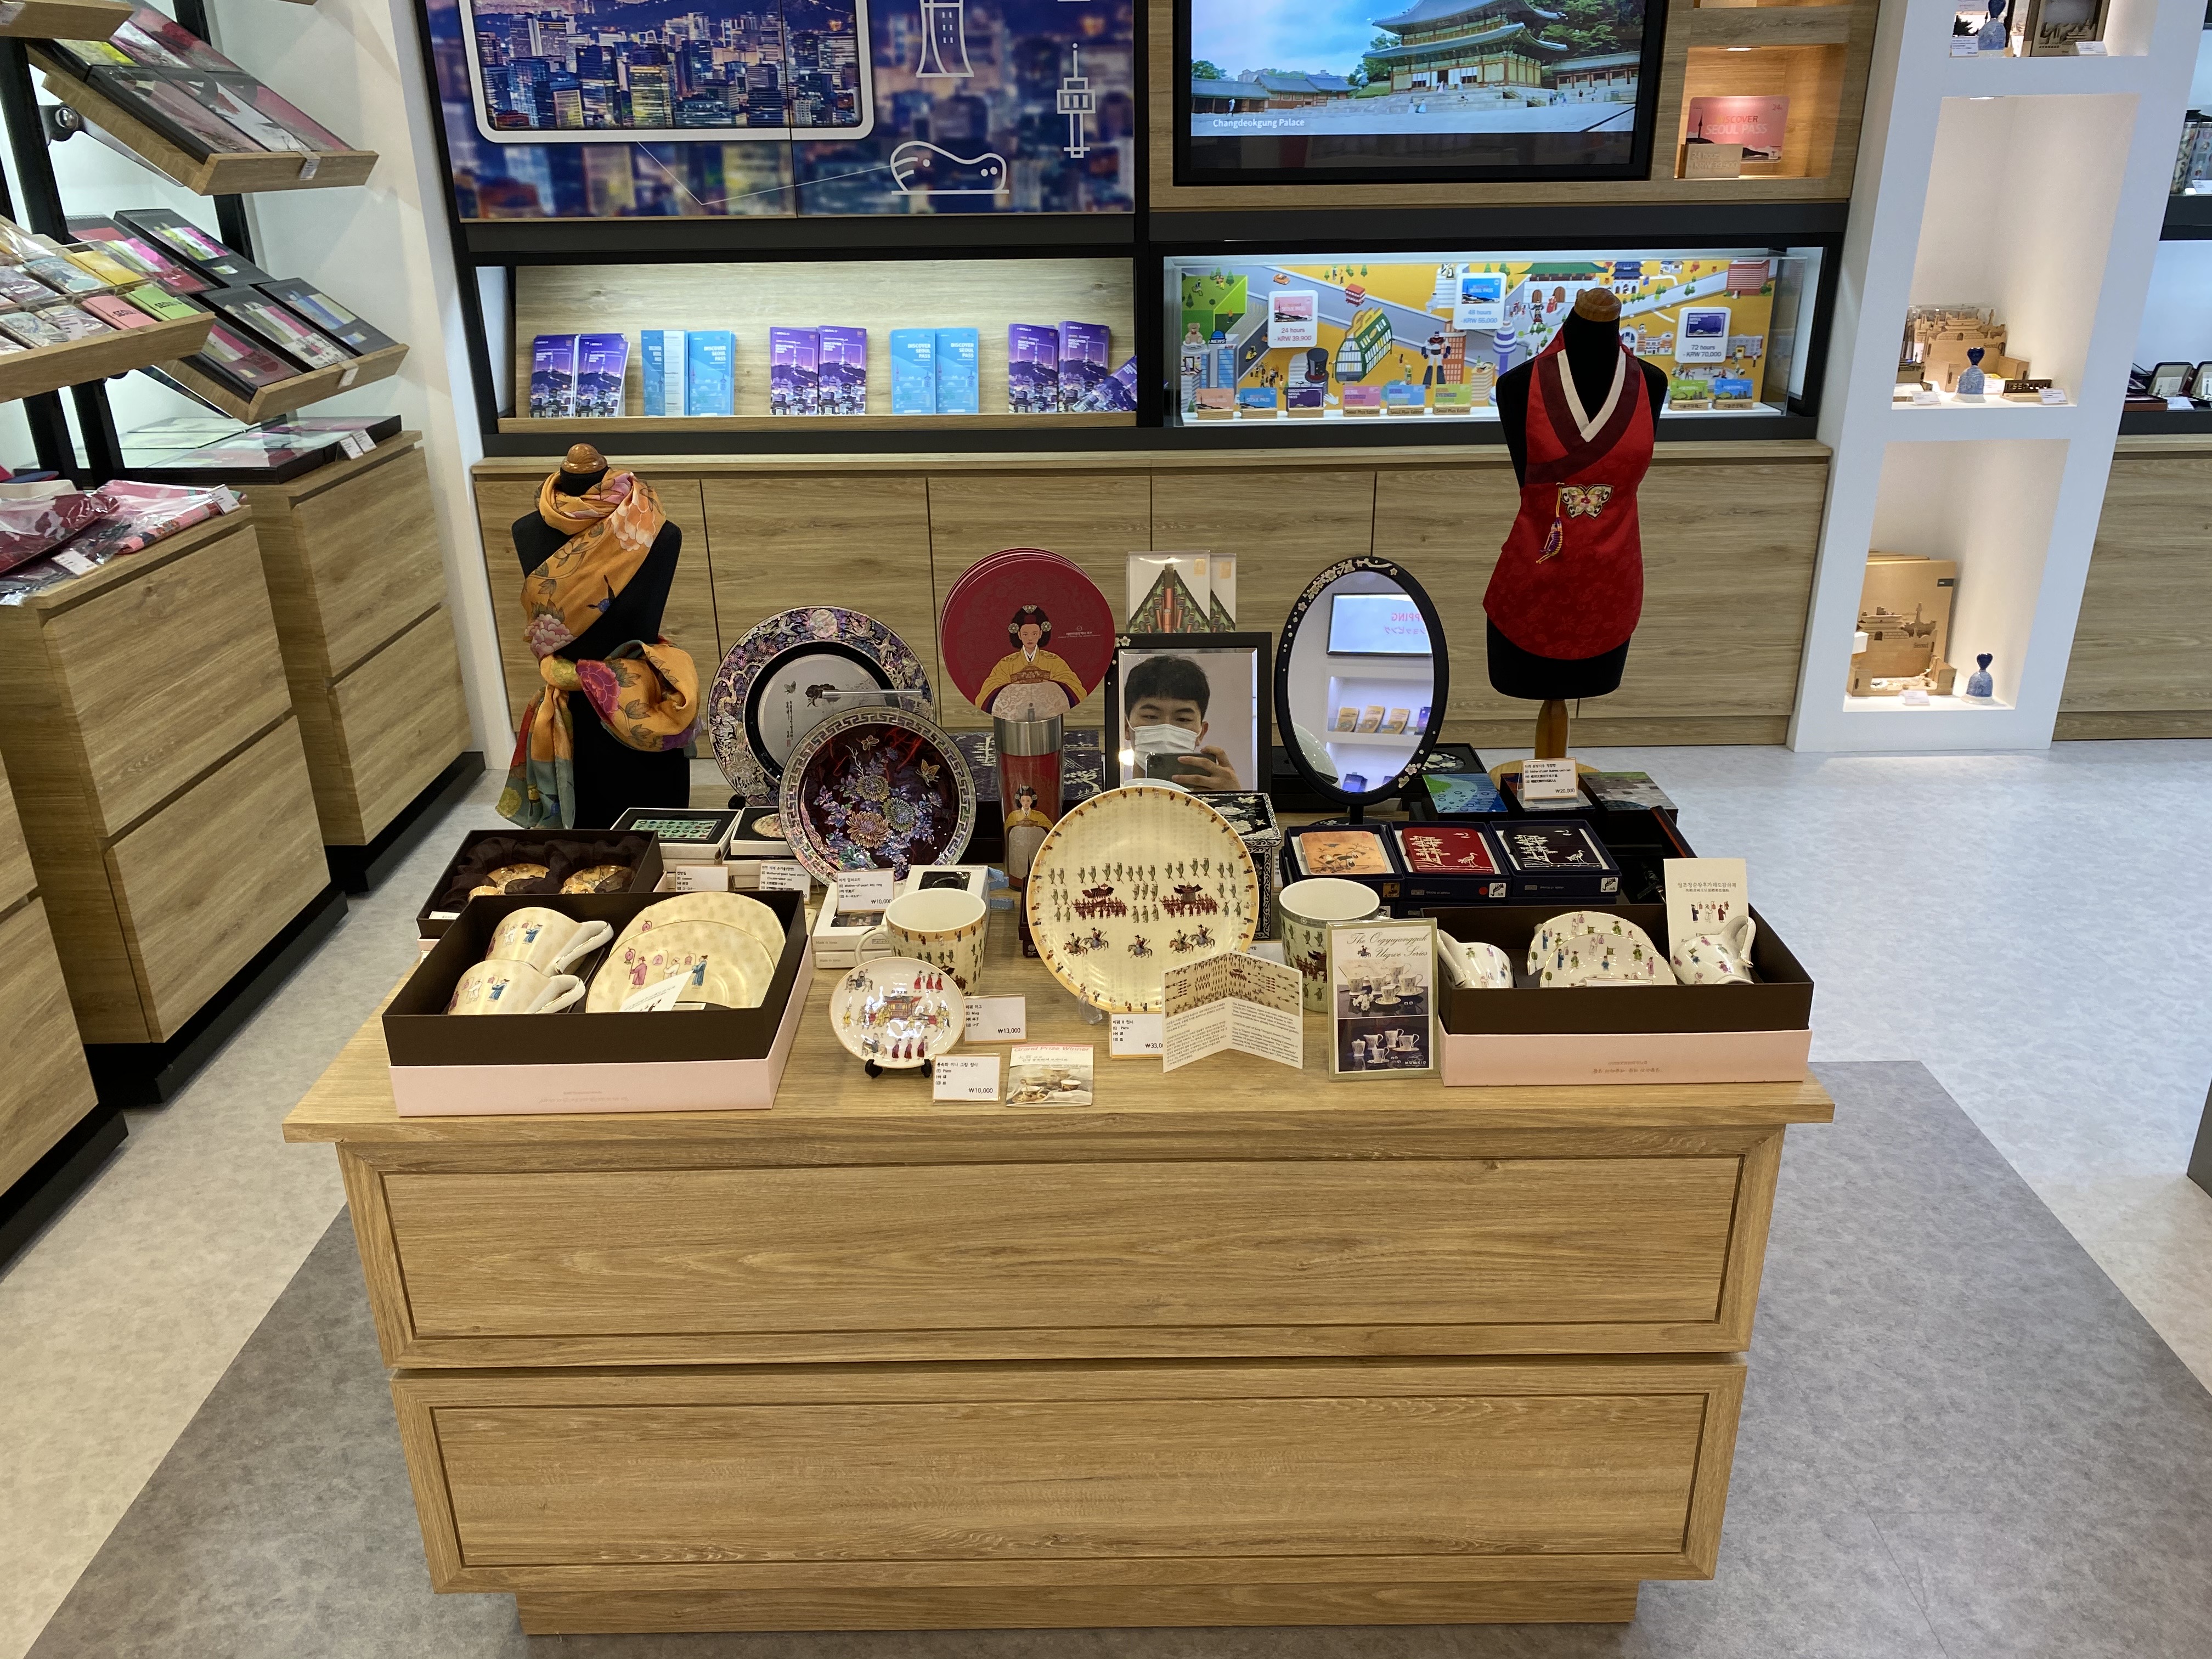 Myeongdong Tourist Information Center3 : Interior view of a souvenir shop with various items